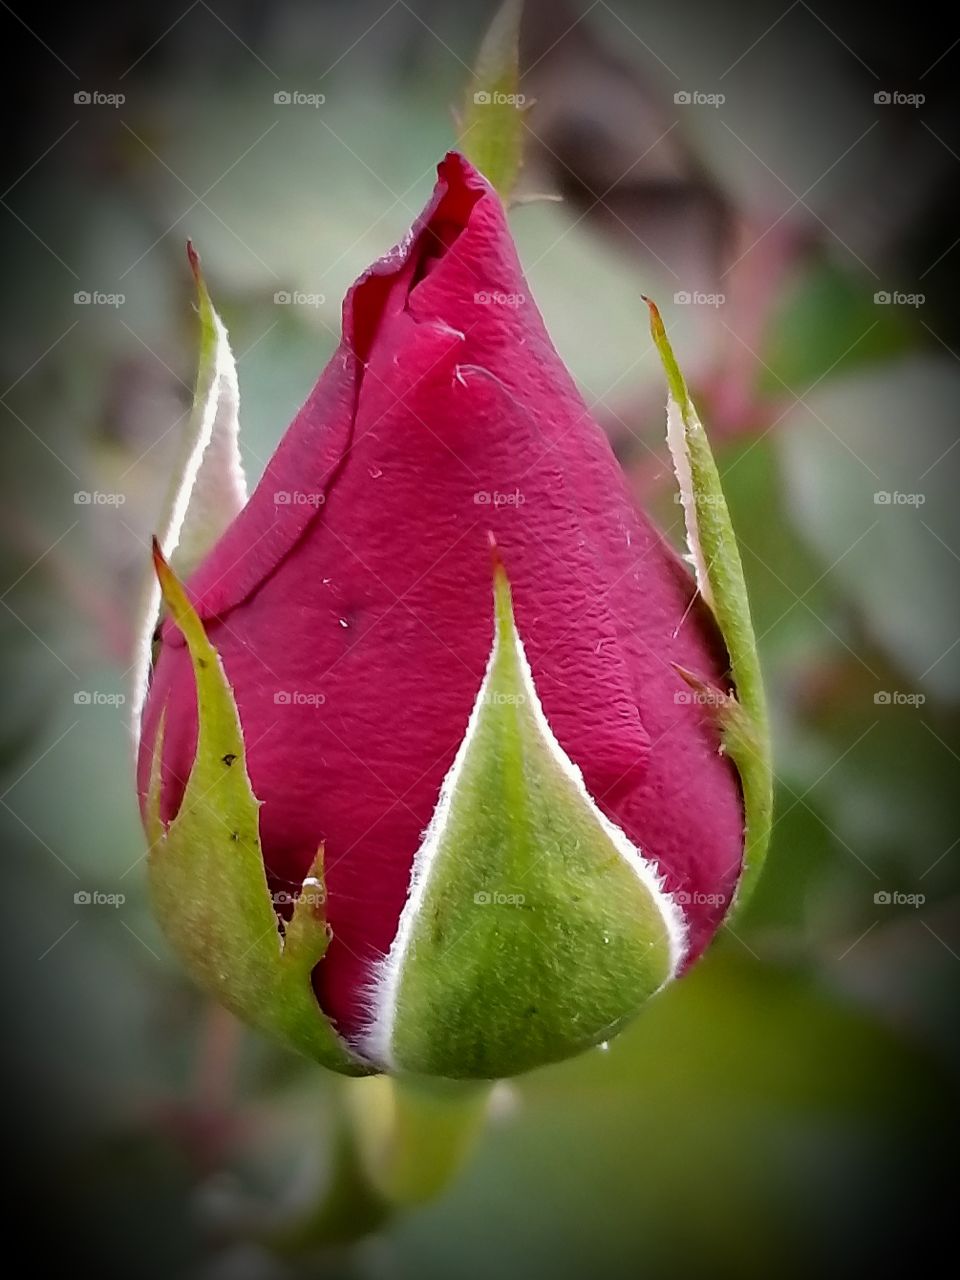 A single red rose bud Blooming at the end of the month of October